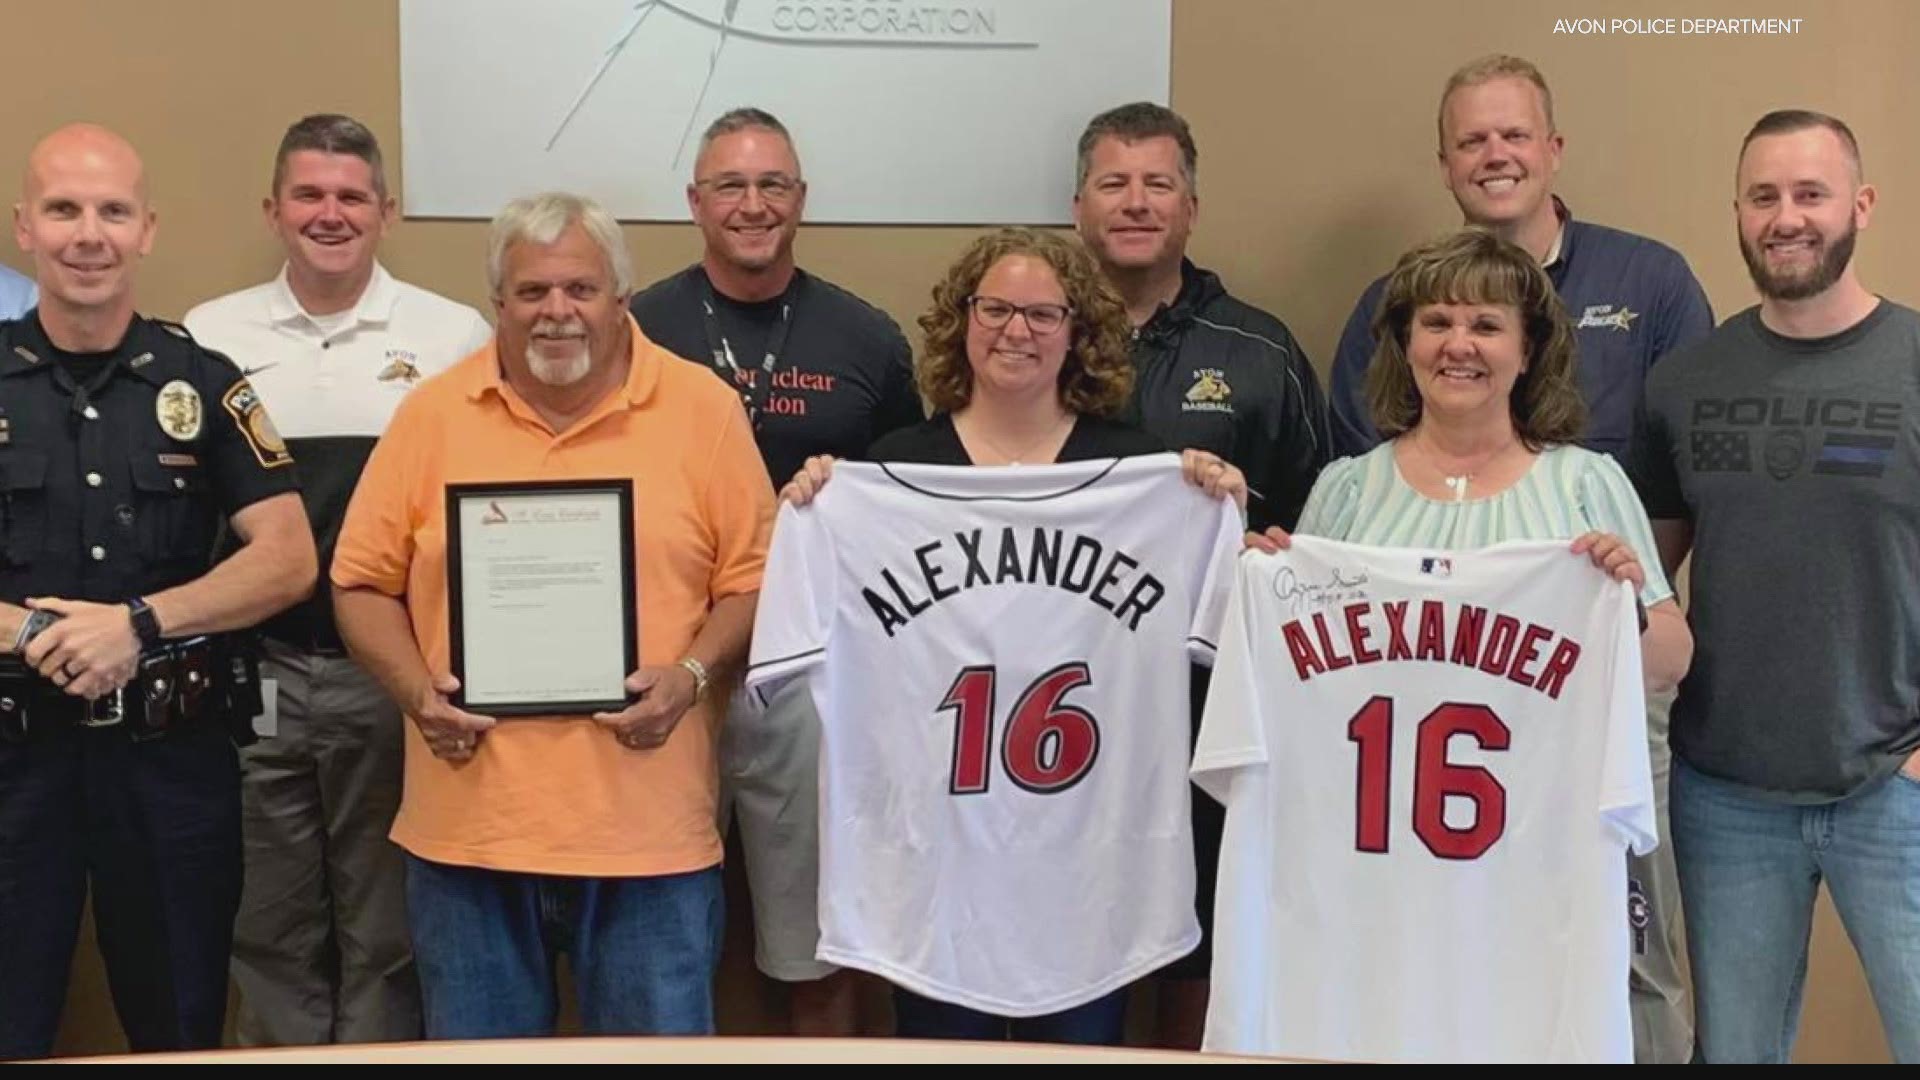 Matt Alexander's family received two customized baseball jerseys thanks to generous members of the community.